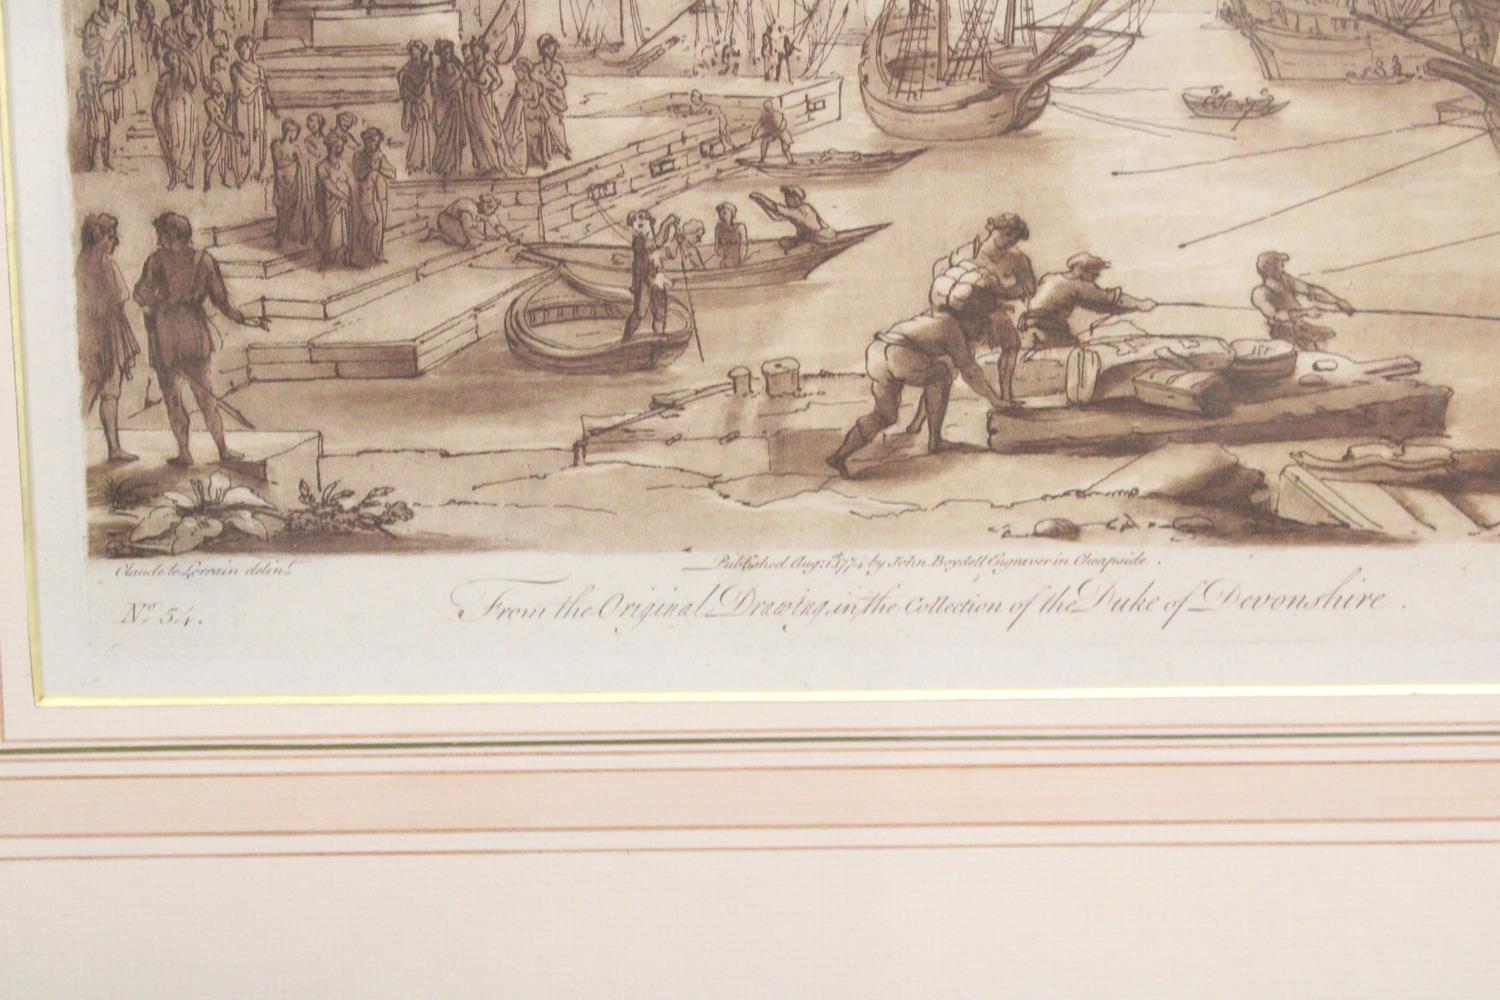 TWO VINTAGE FRAMED PRINTS TAKEN FROM THE ORIGINAL DRAWING, IN THE COLLECTION OF THE DUKE OF - Image 6 of 6